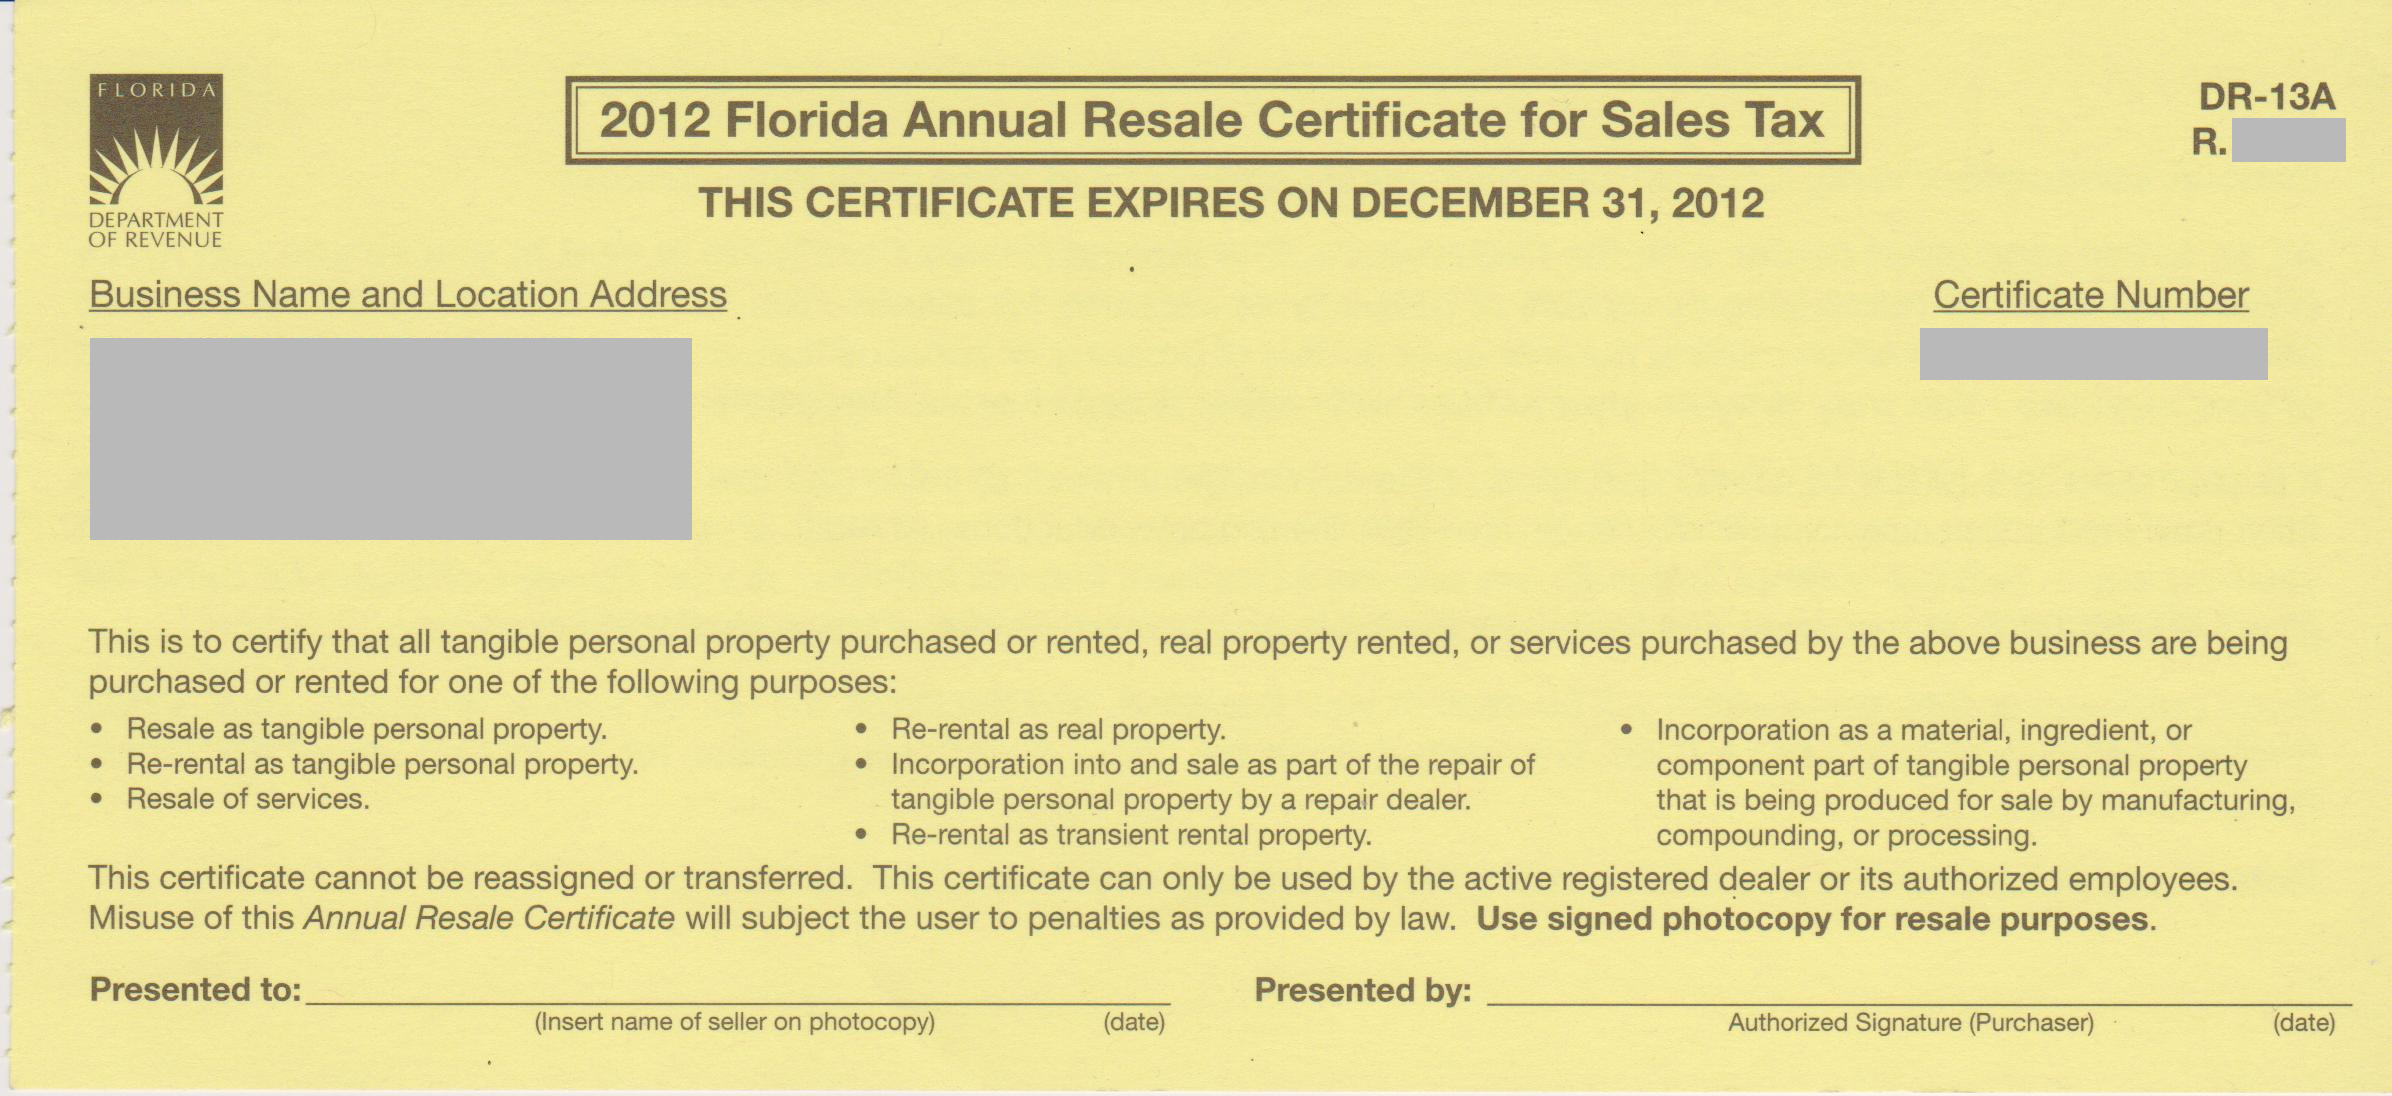 Sales Tax Certificate of Registration or Sales Tax Certificate of